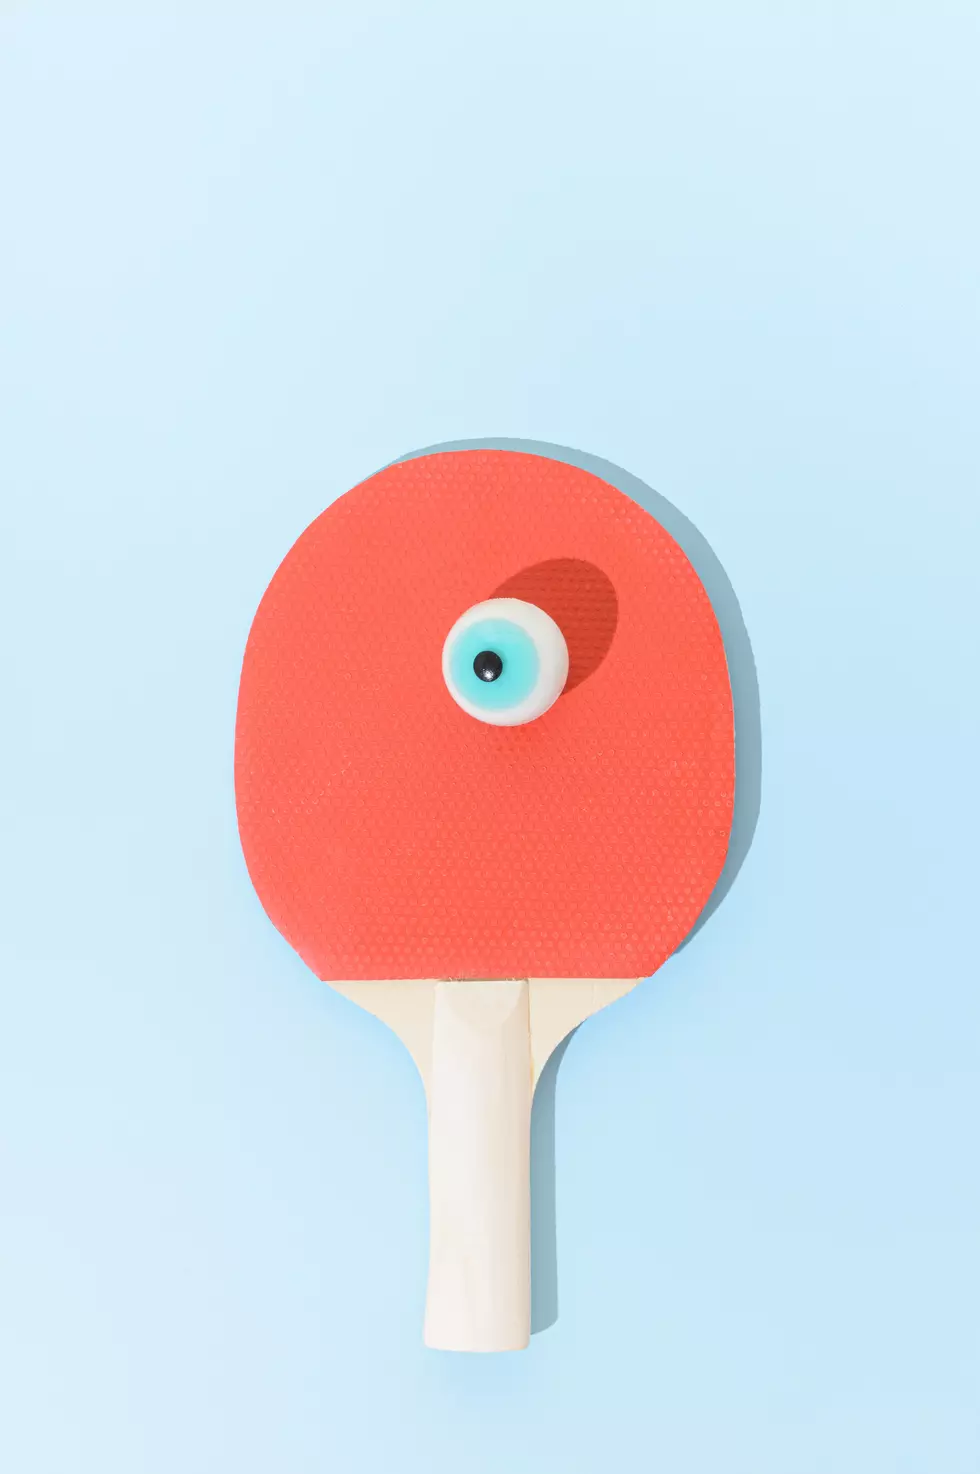 A table tennis racket with a false eye instead of a ball. Surreal sport ping pong competitive concept.